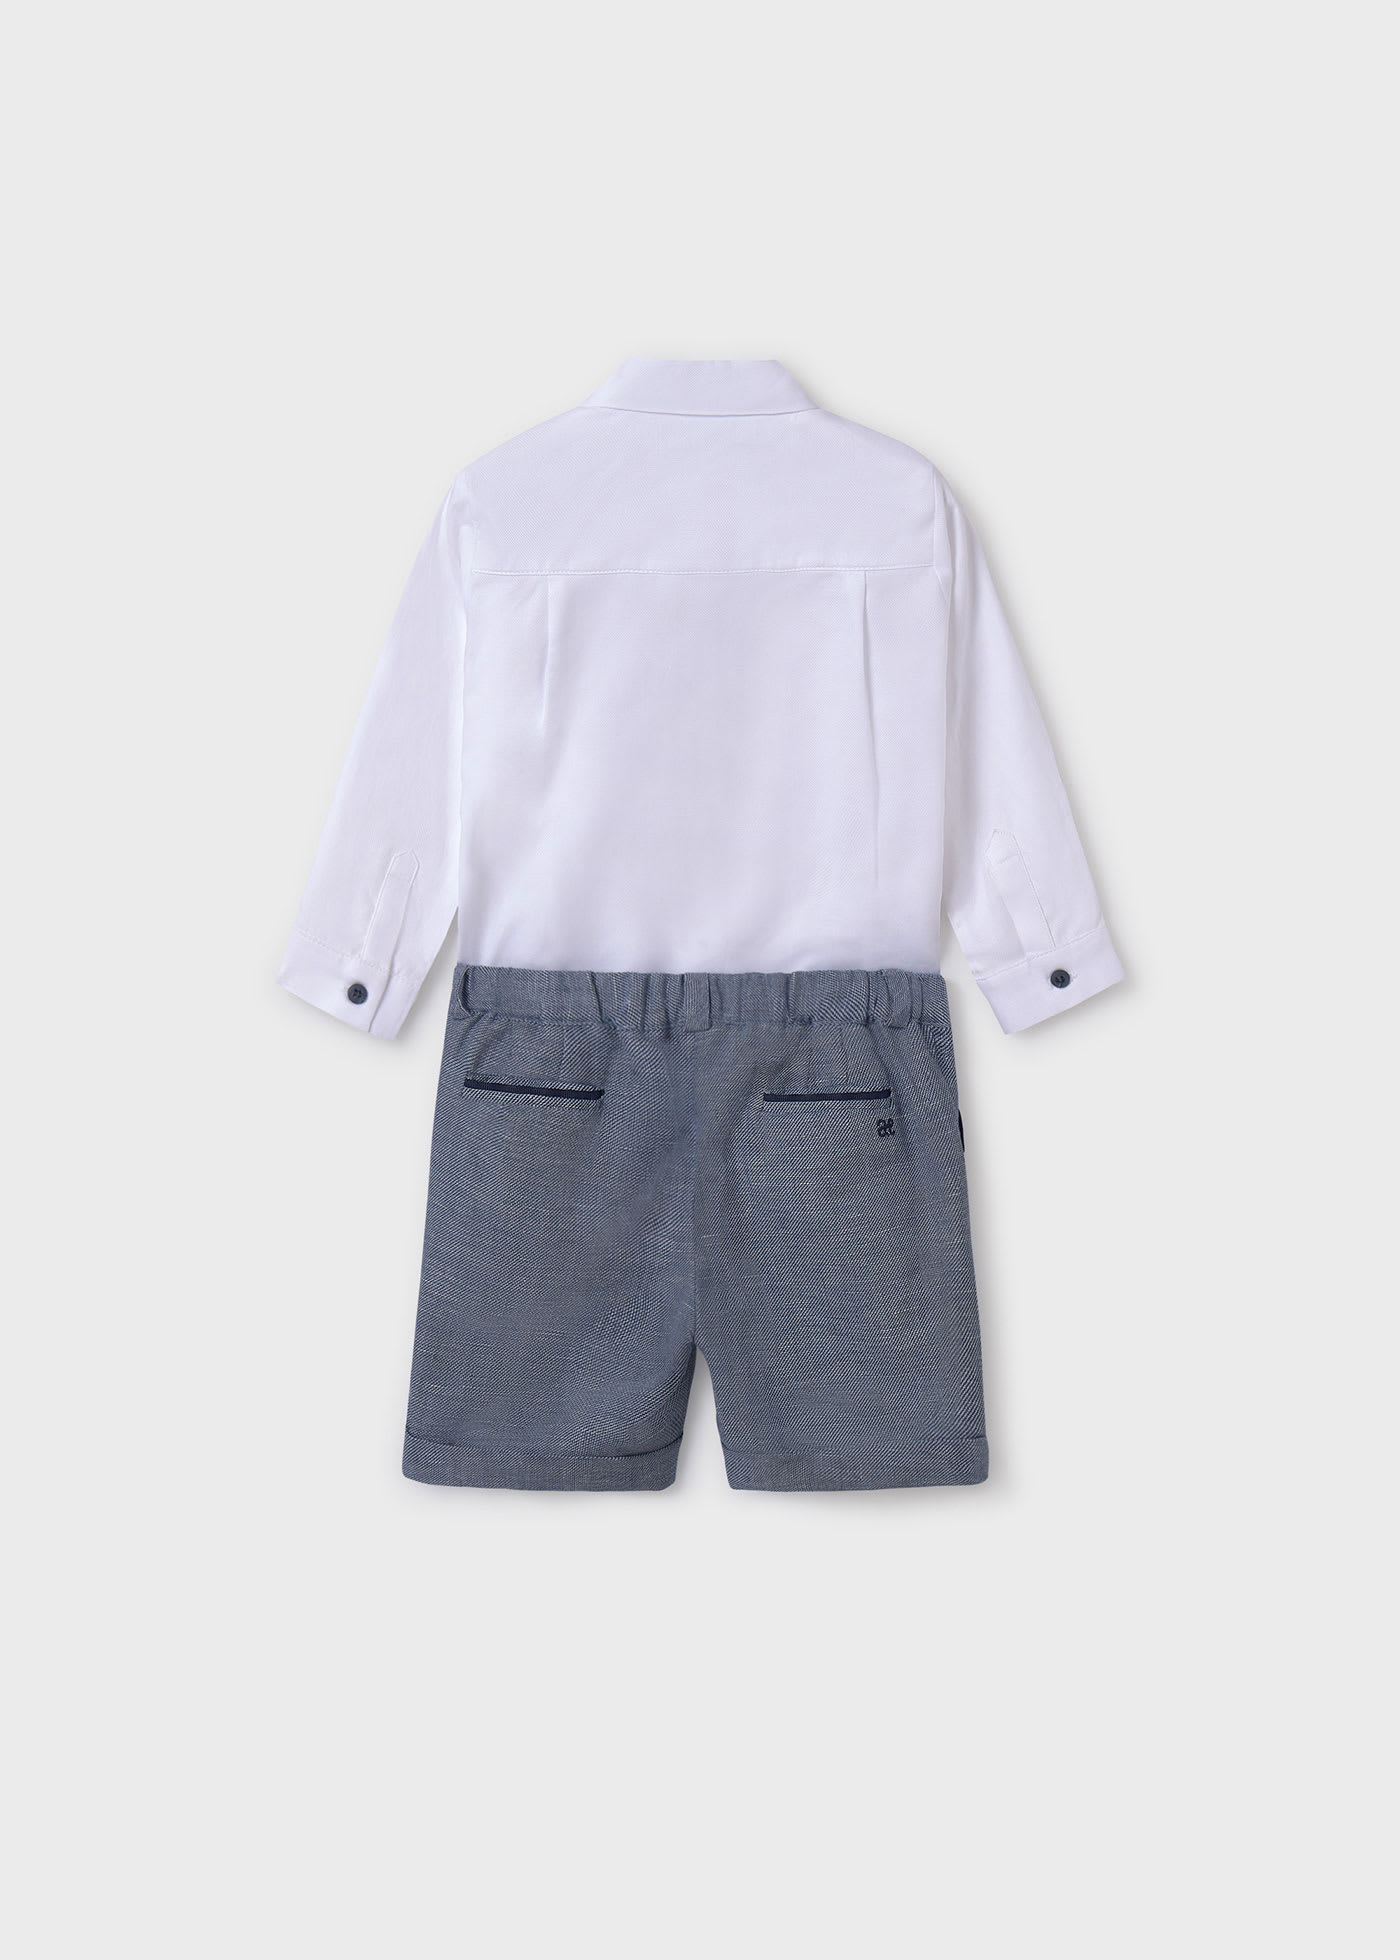 Baby set of shorts with shirt and bow tie